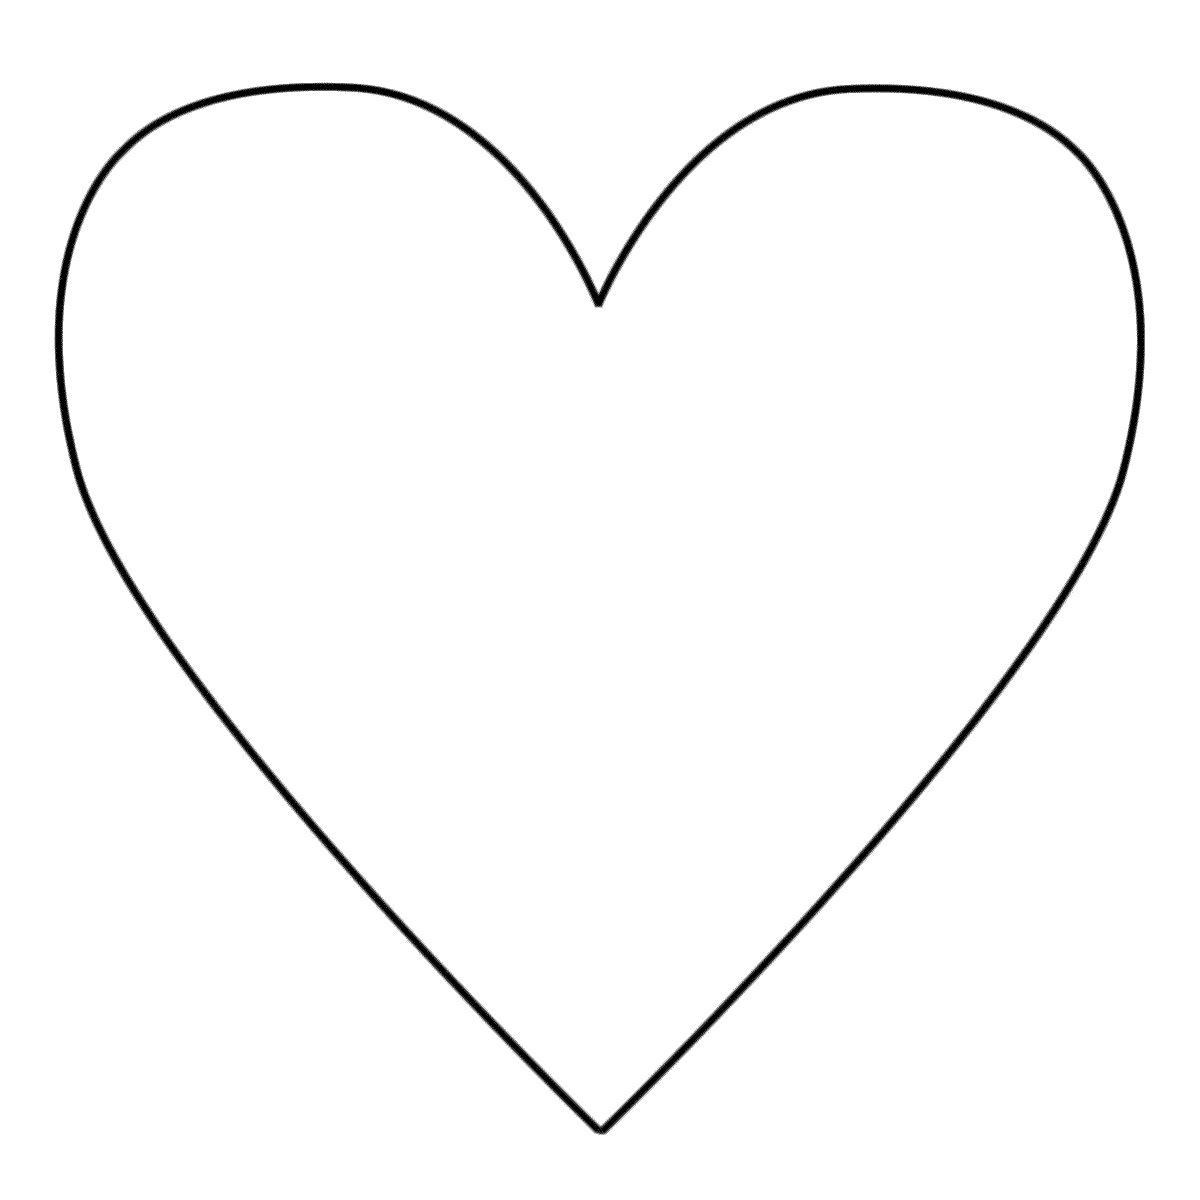 colouring love hearts love heart coloring page heart coloring pages love colouring hearts love 